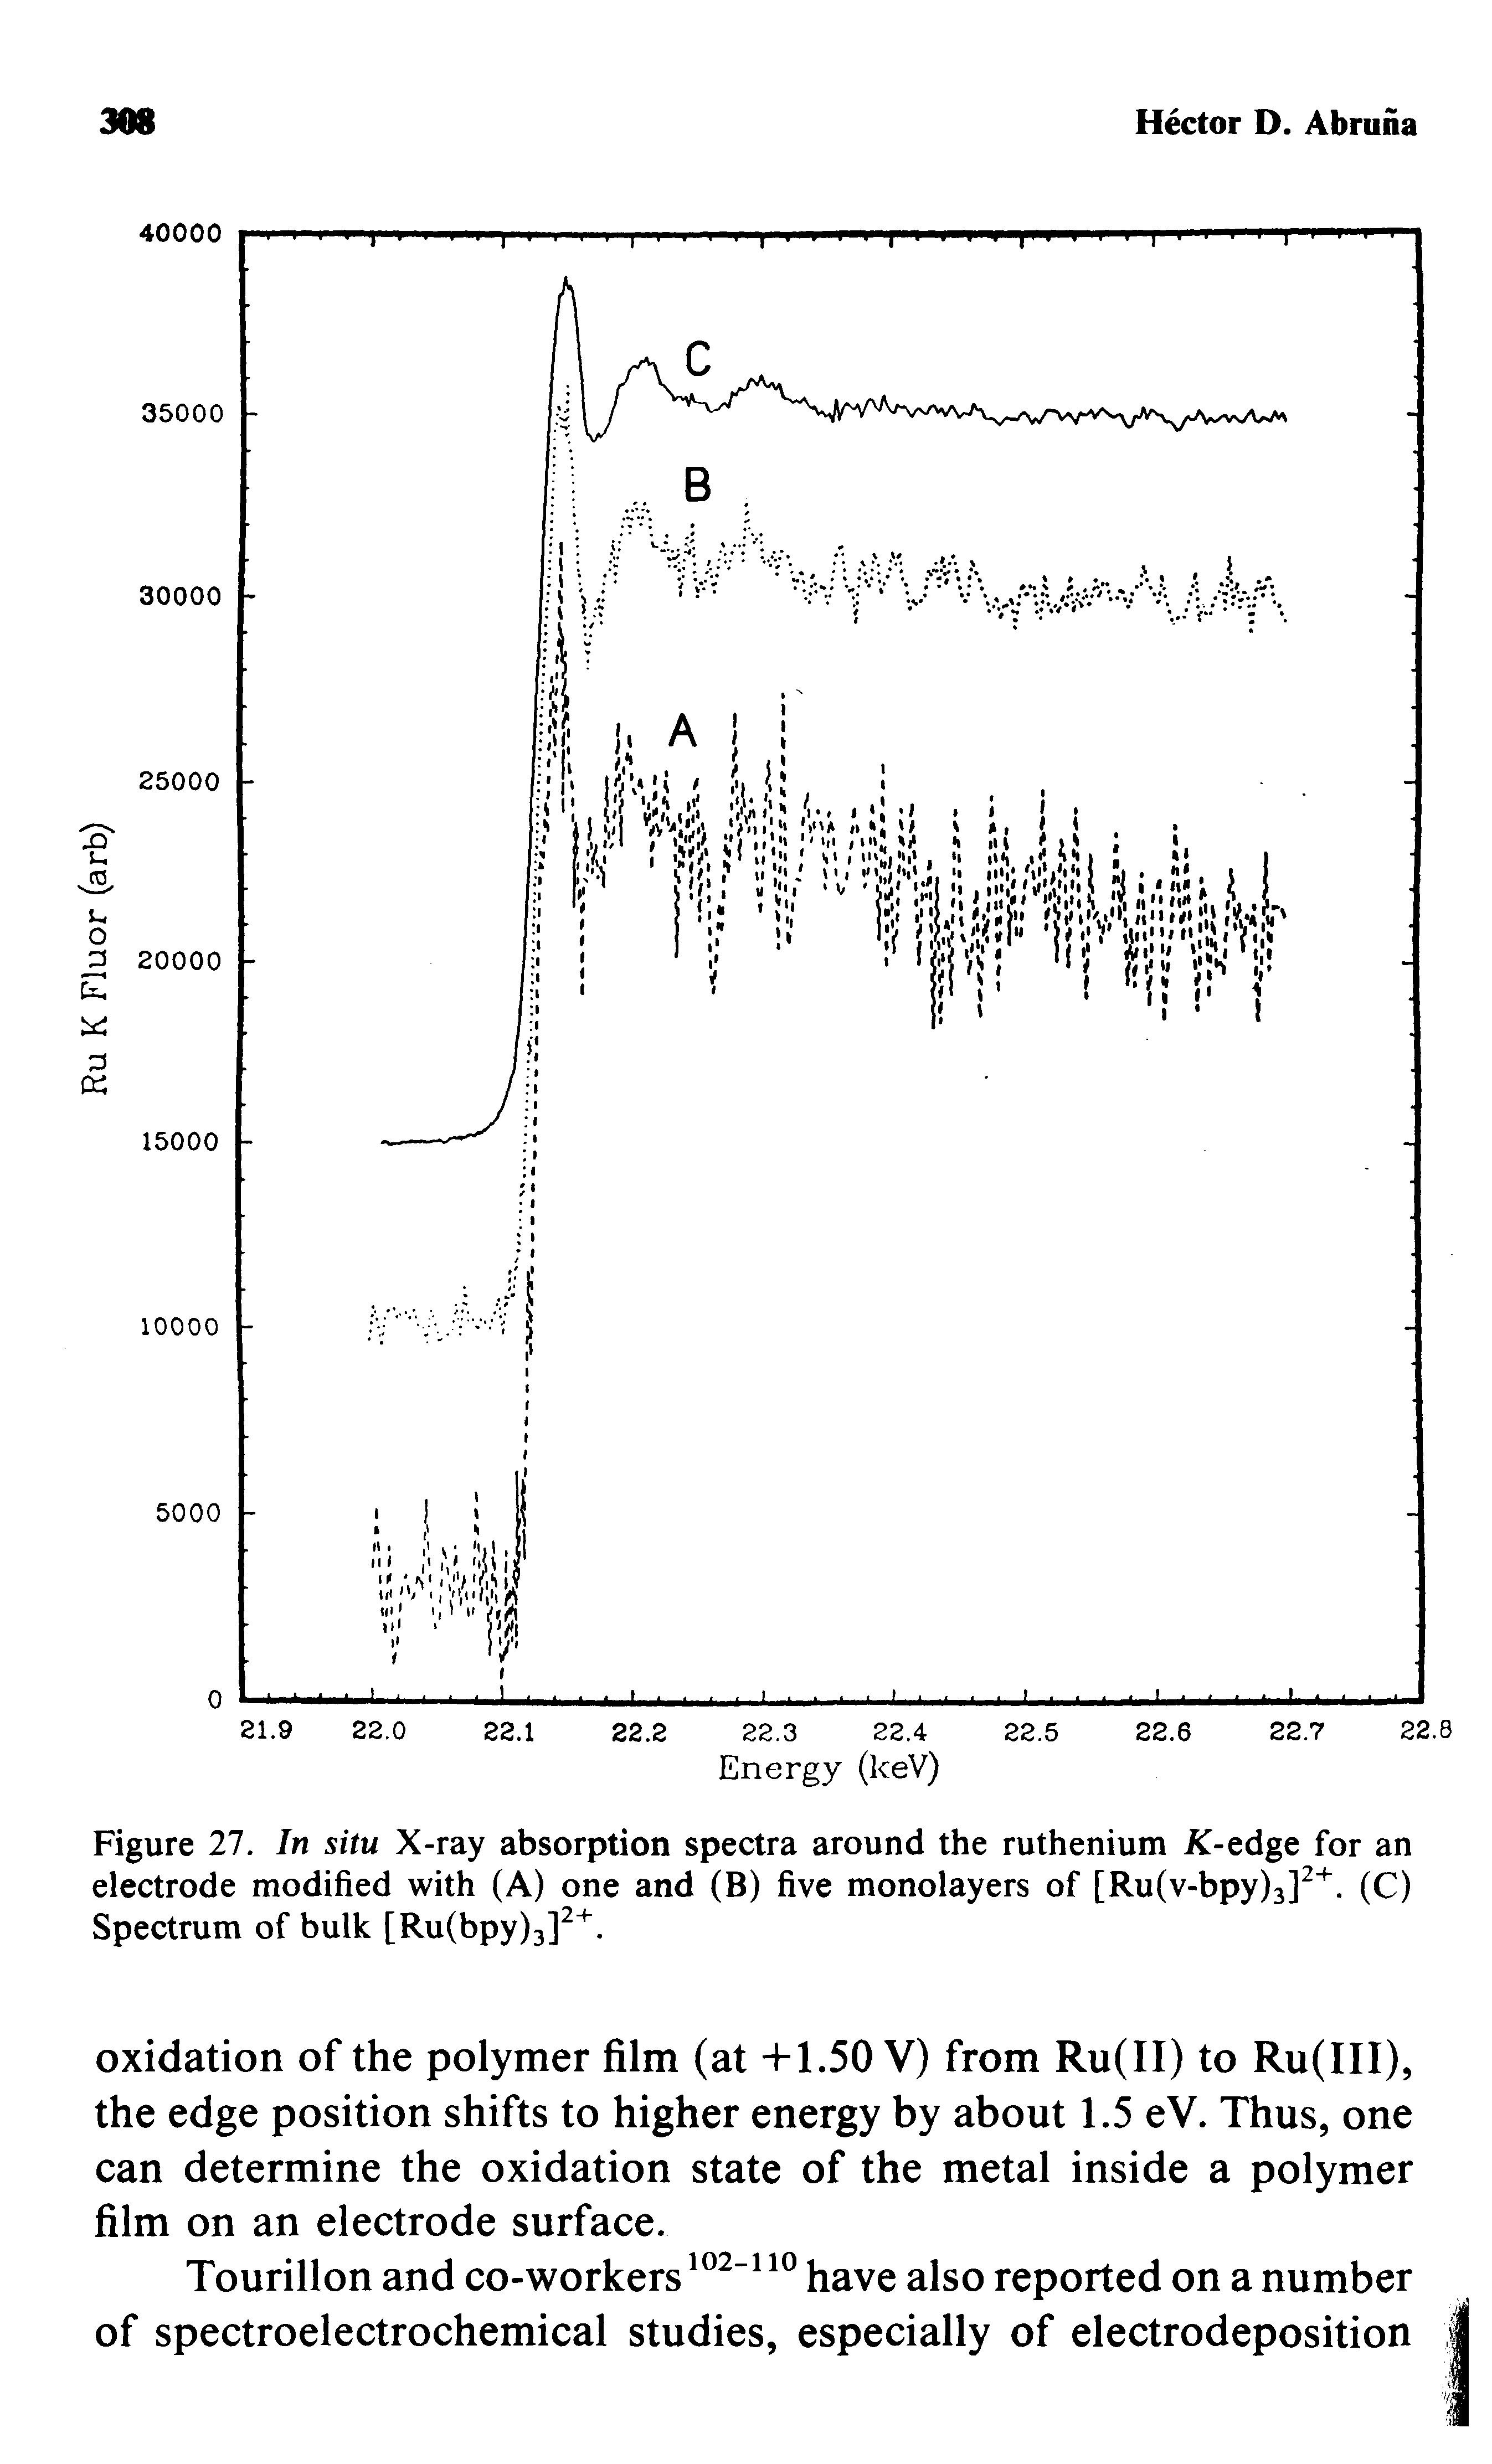 Figure 27. In situ X-ray absorption spectra around the ruthenium X-edge for an electrode modified with (A) one and (B) five monolayers of [Ru(v-bpy)3]2+. (C) Spectrum of bulk [Ru(bpy)3]2+.